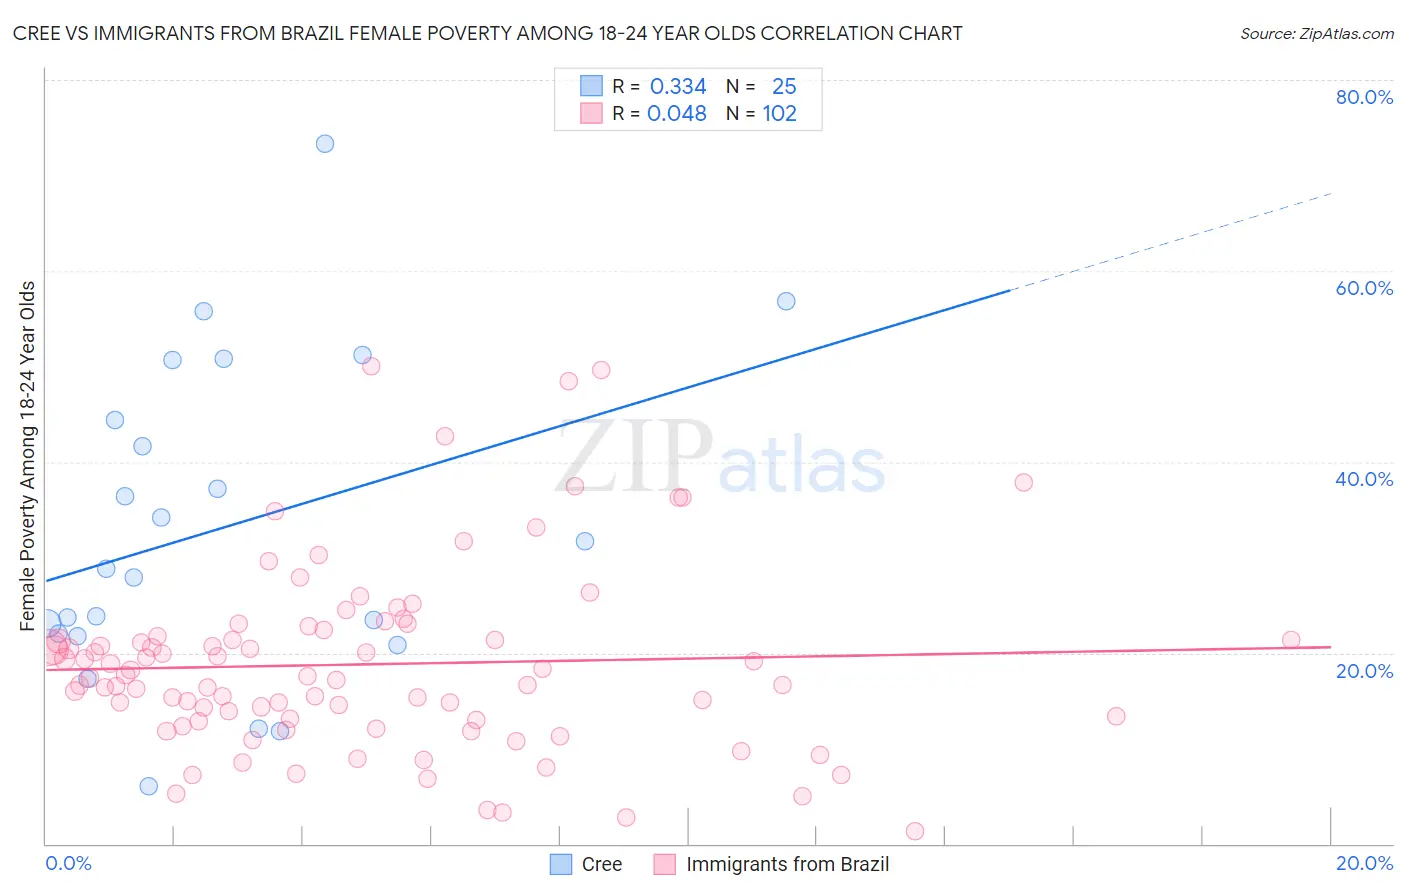 Cree vs Immigrants from Brazil Female Poverty Among 18-24 Year Olds